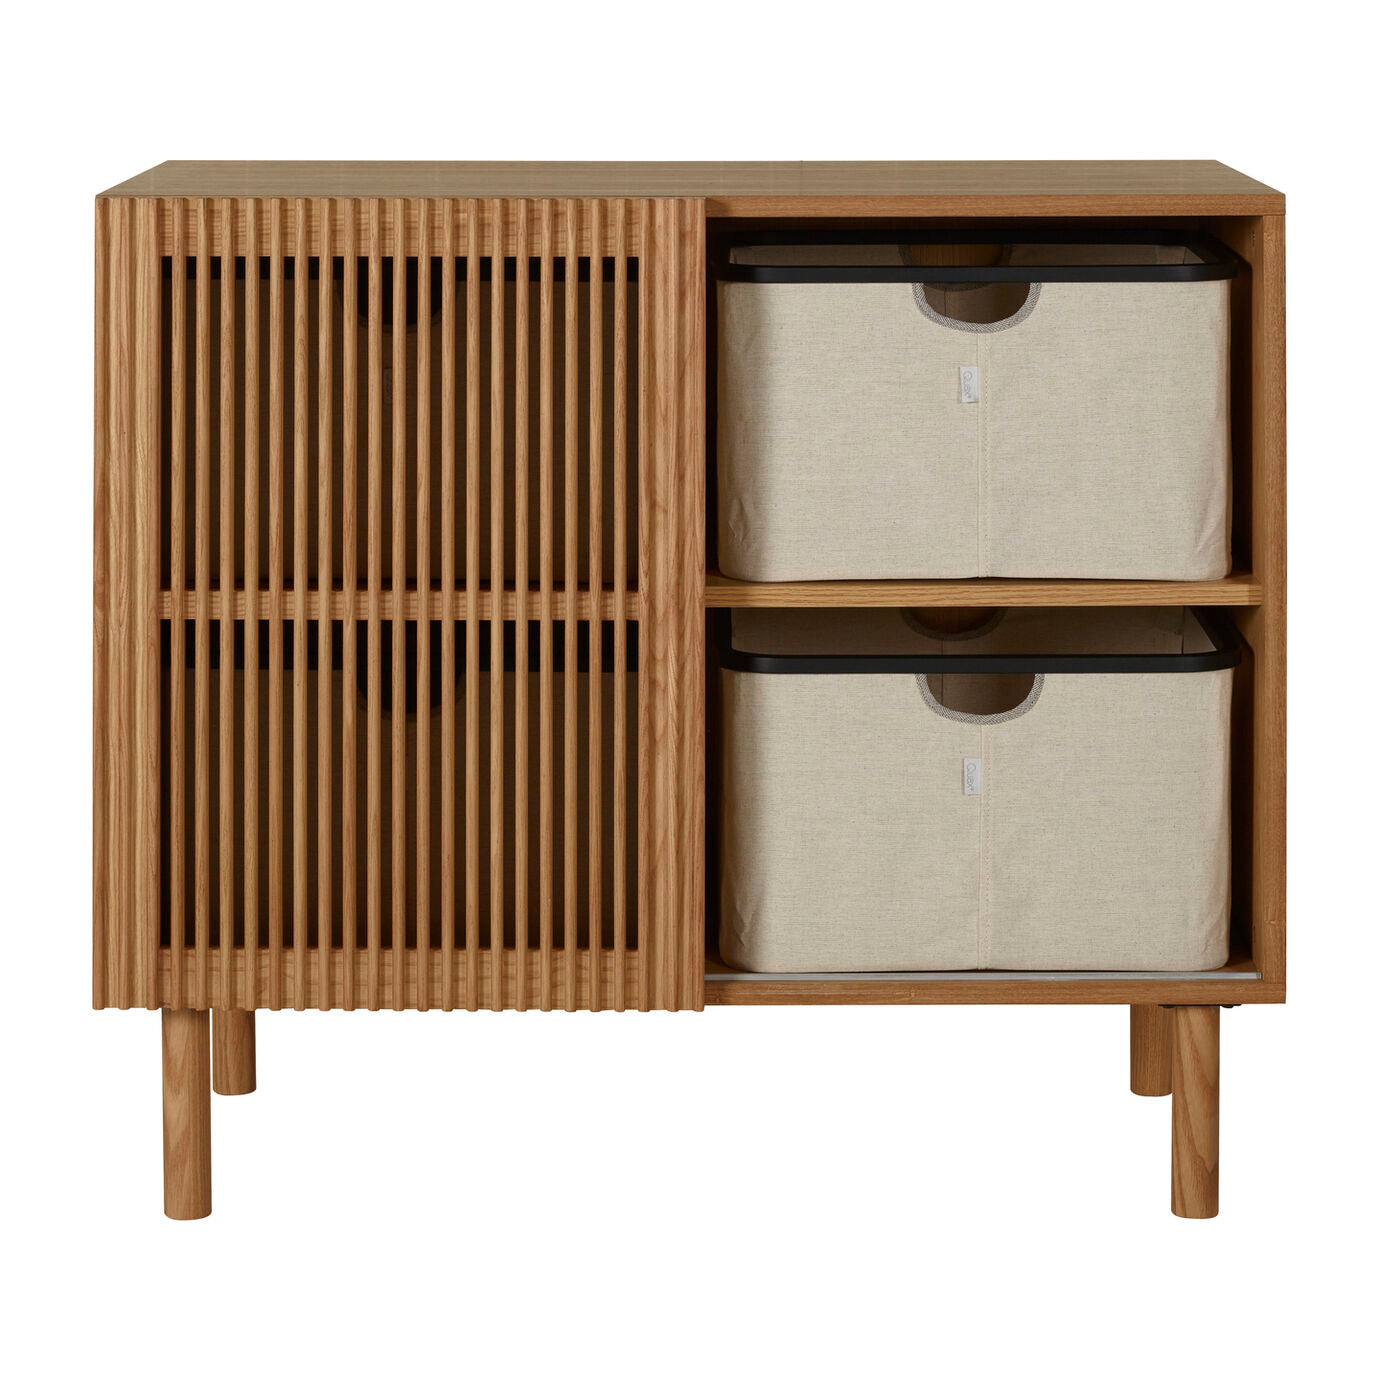 Deer Industries Home Furniture Singapore, Quax Singapore Hai No Ki Series, Wooden Cabinet with Sliding Door, Sliding slated door cabinet, Baby Changing Table, Kids storage, Home Storage Singapore